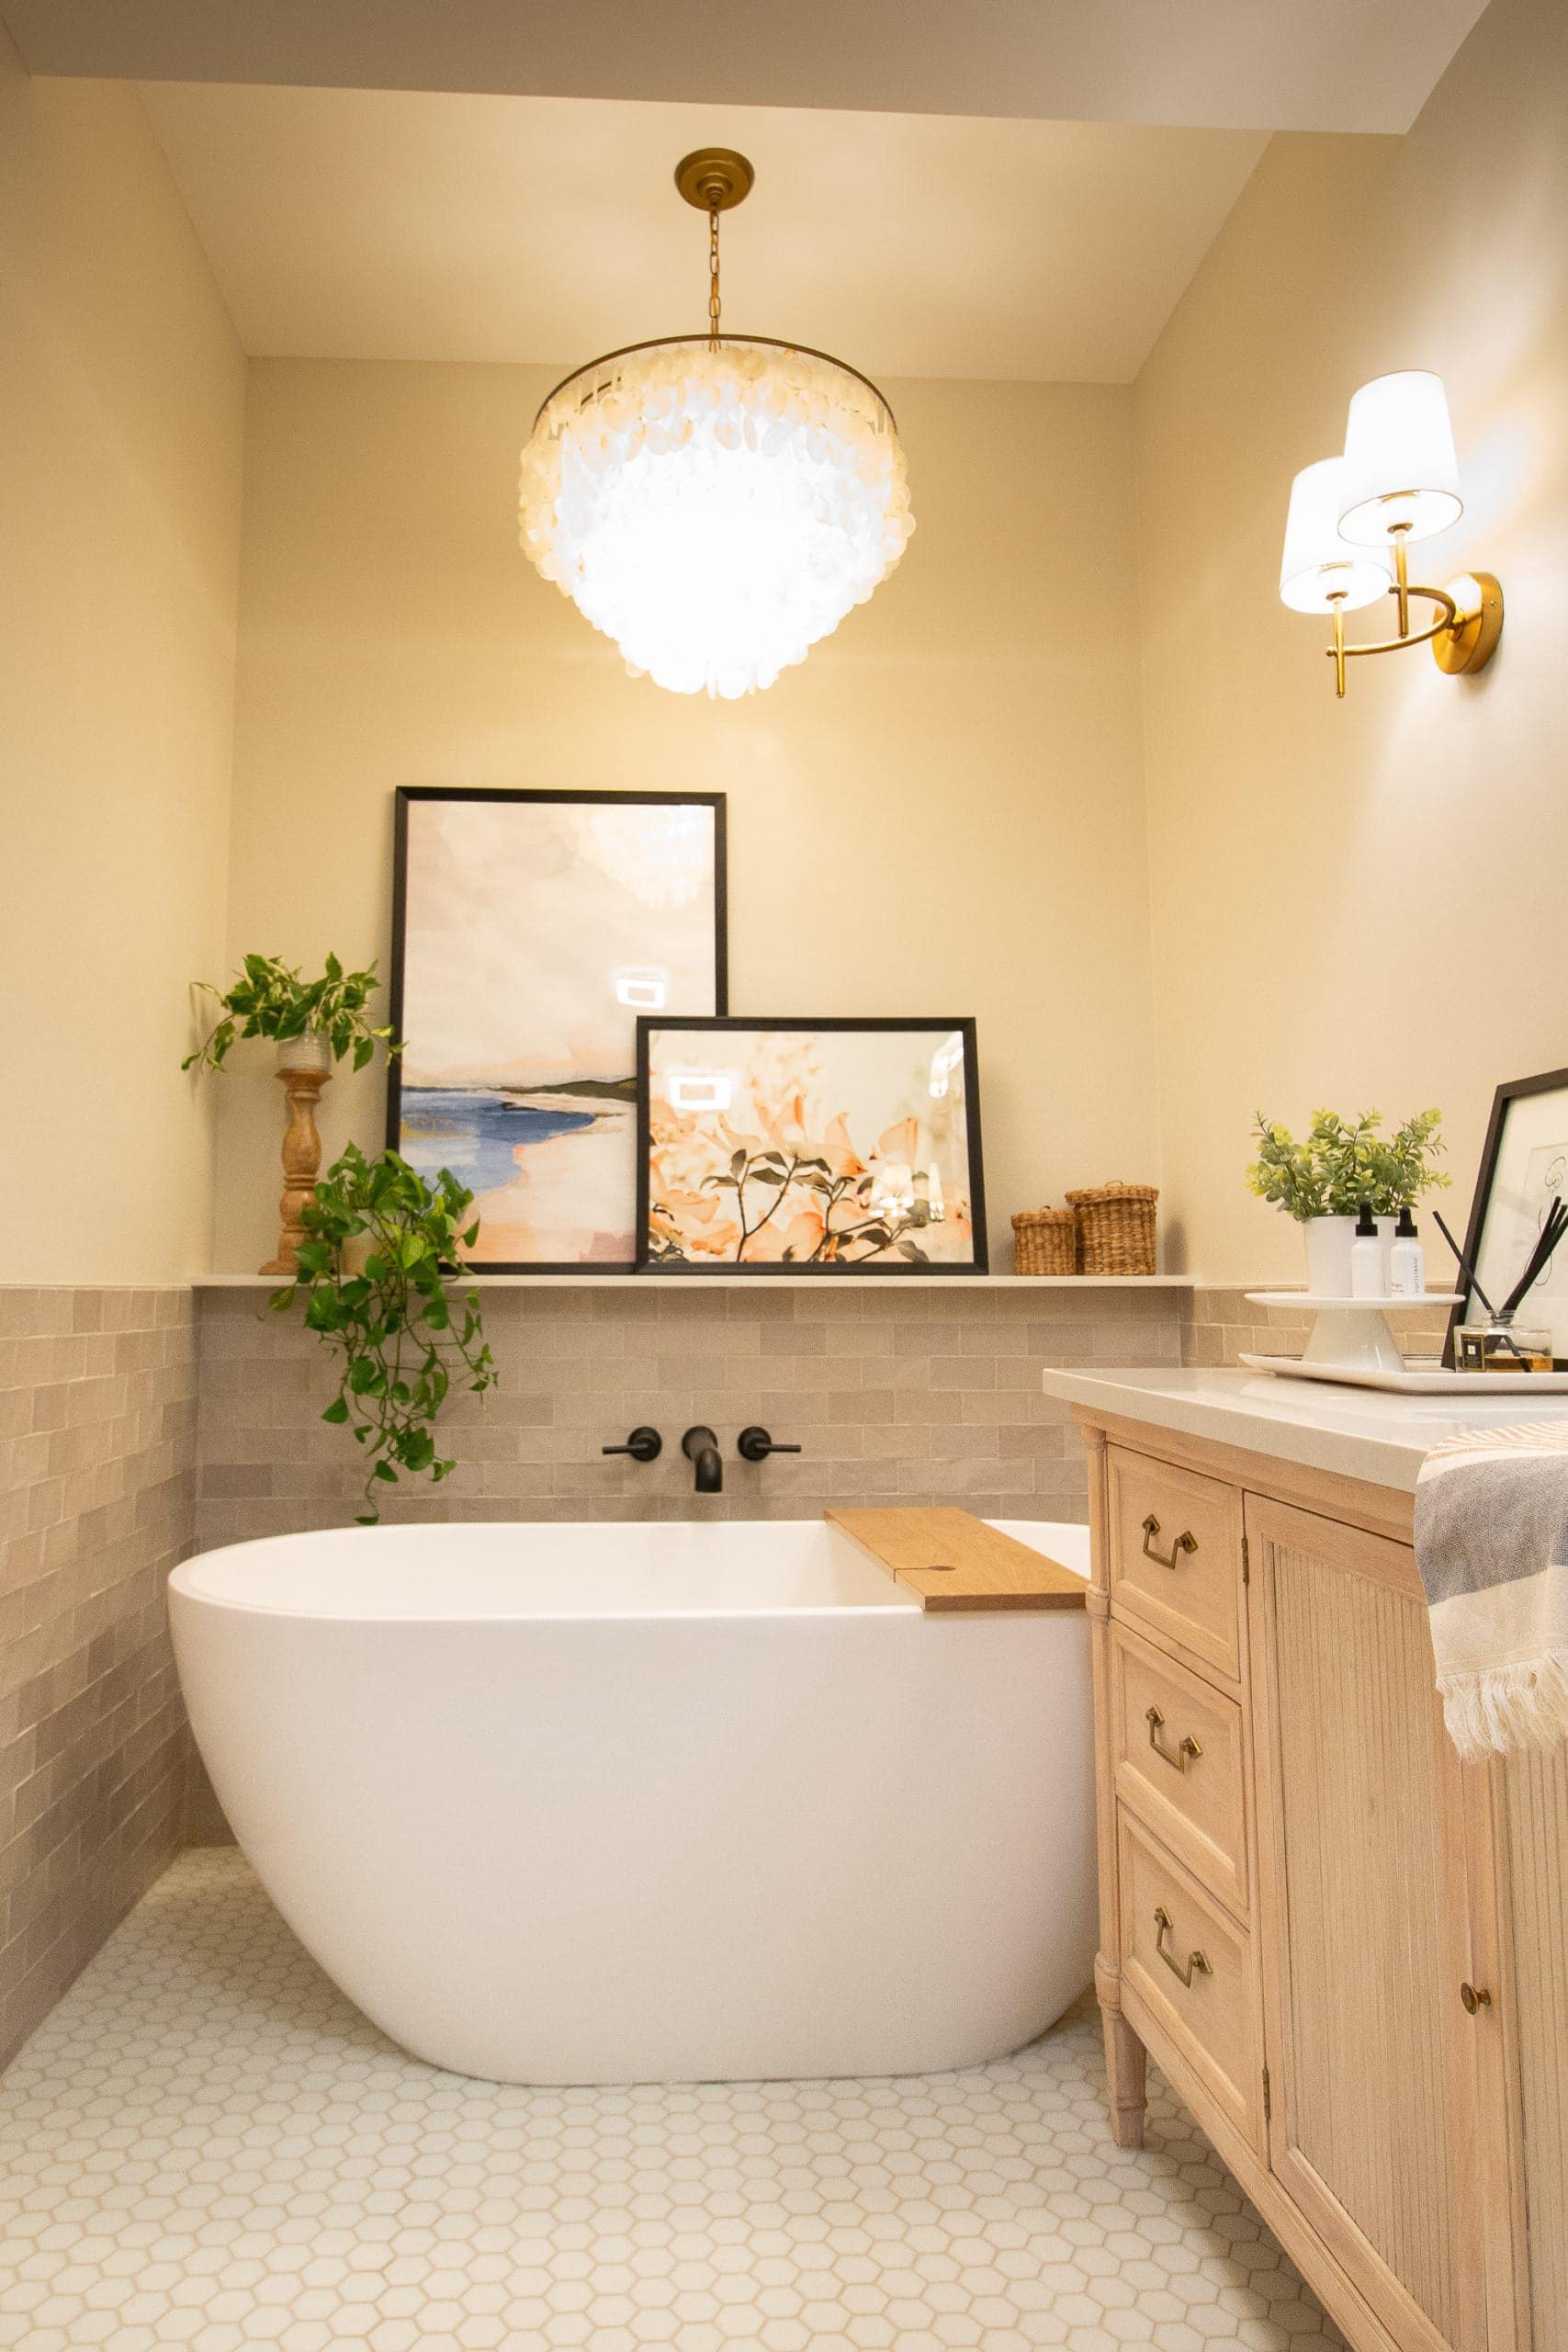 Jan's main bathroom reveal with a freestanding tub